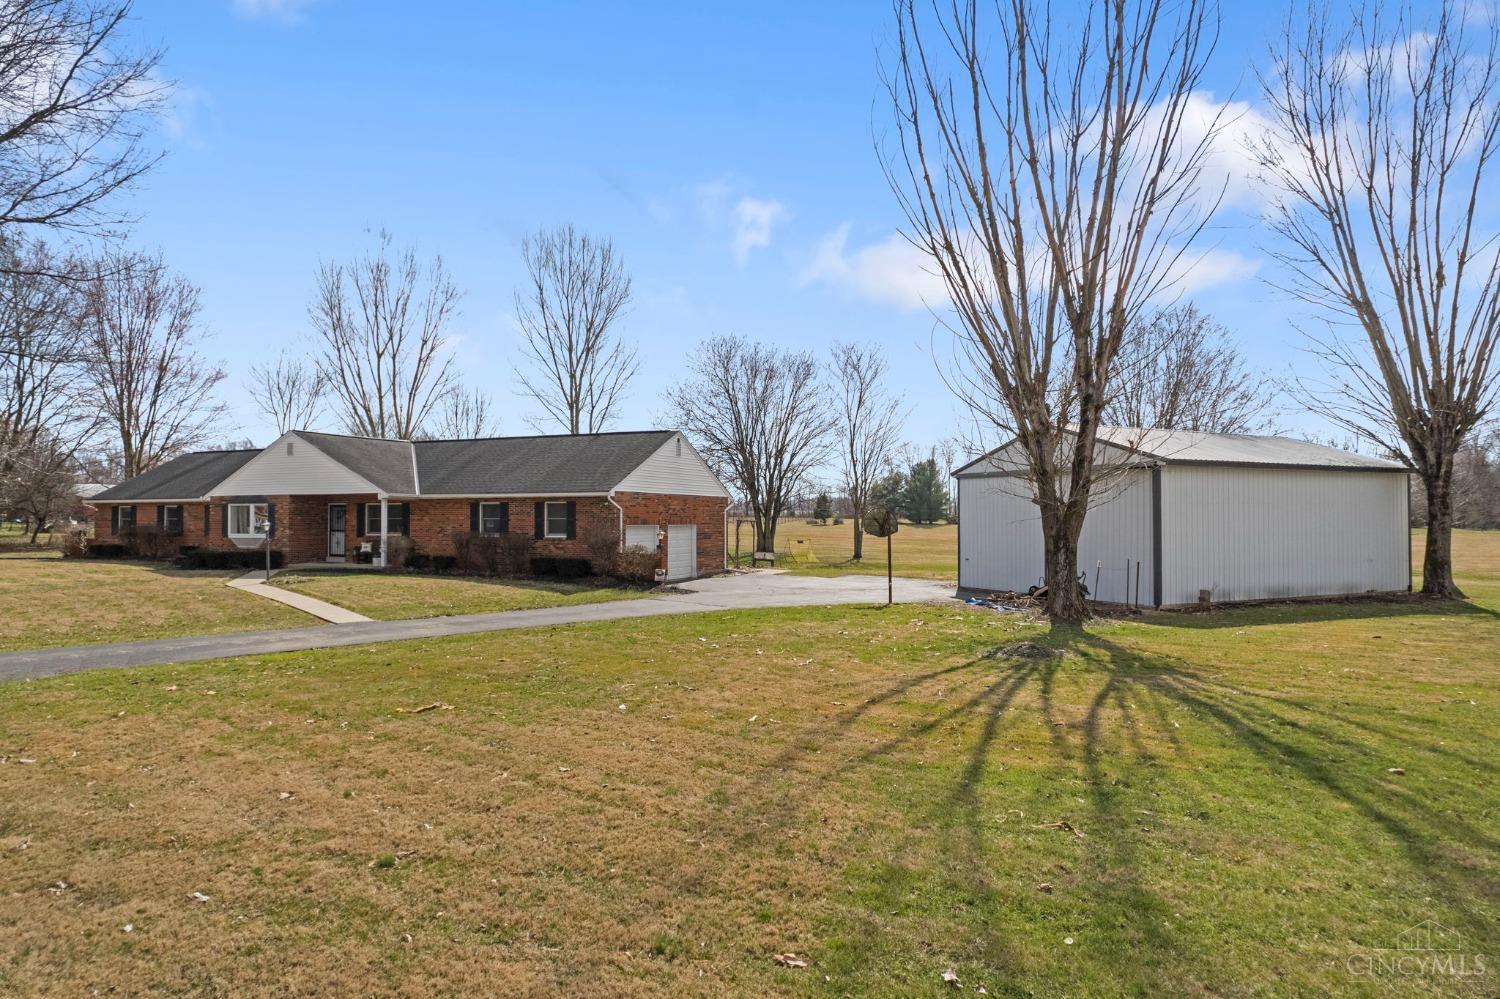 3179 Pitzer Rd, Tate Twp, OH 45106